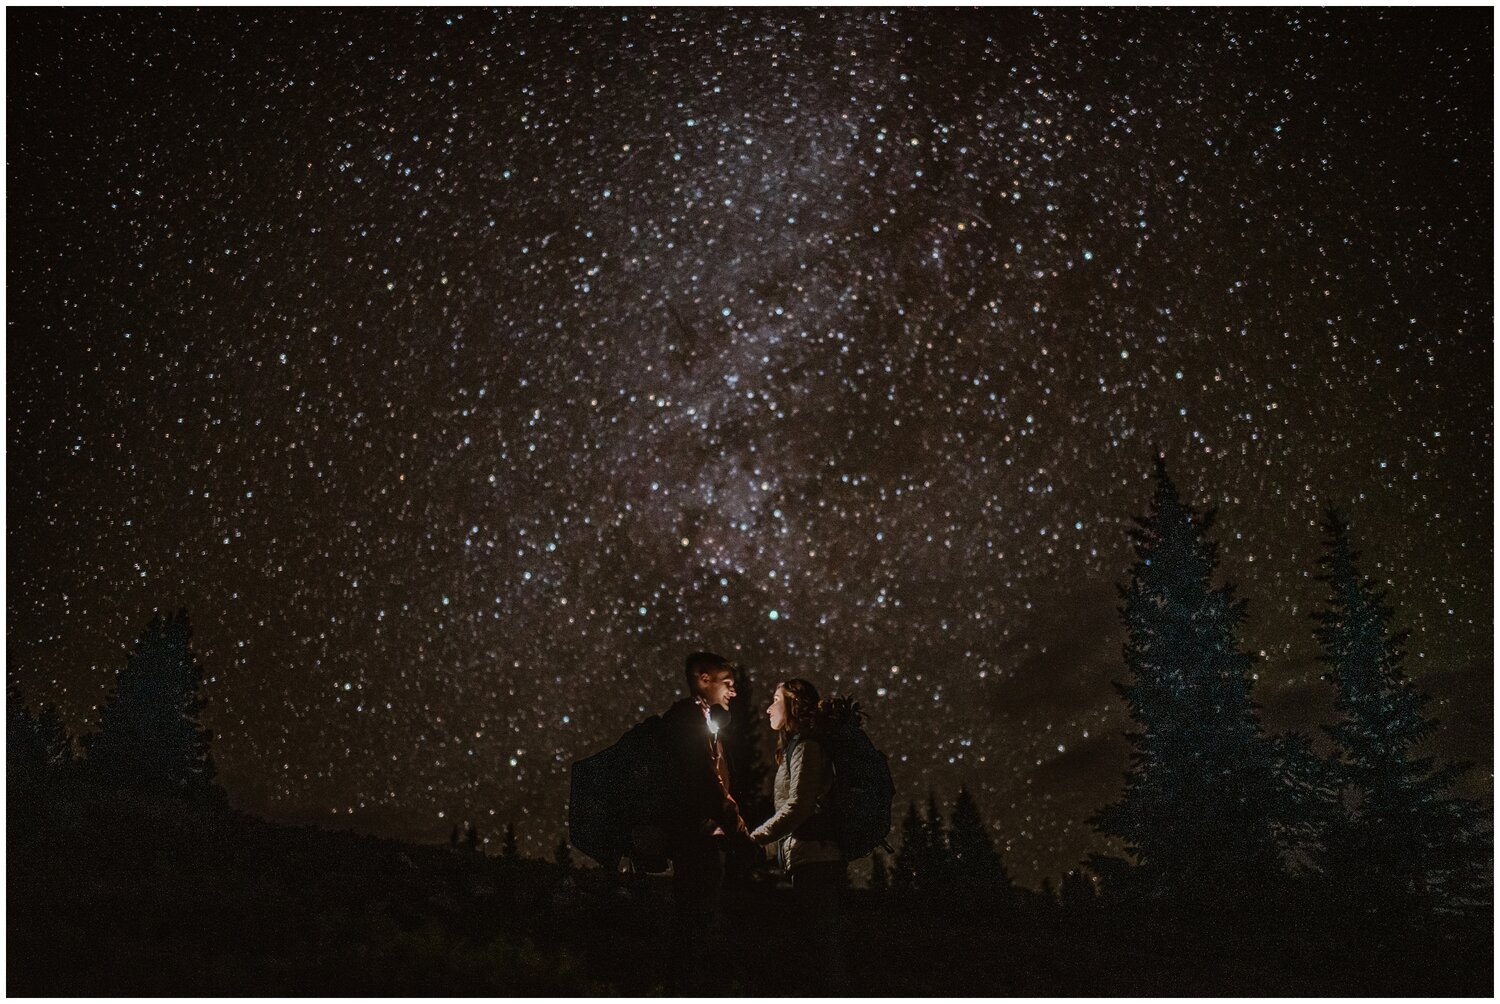 Bride and groom facing each other and holding hands, while wearing headlamps in the dark. Stars and trees visible behind them in Buena Vista, Colorado. 